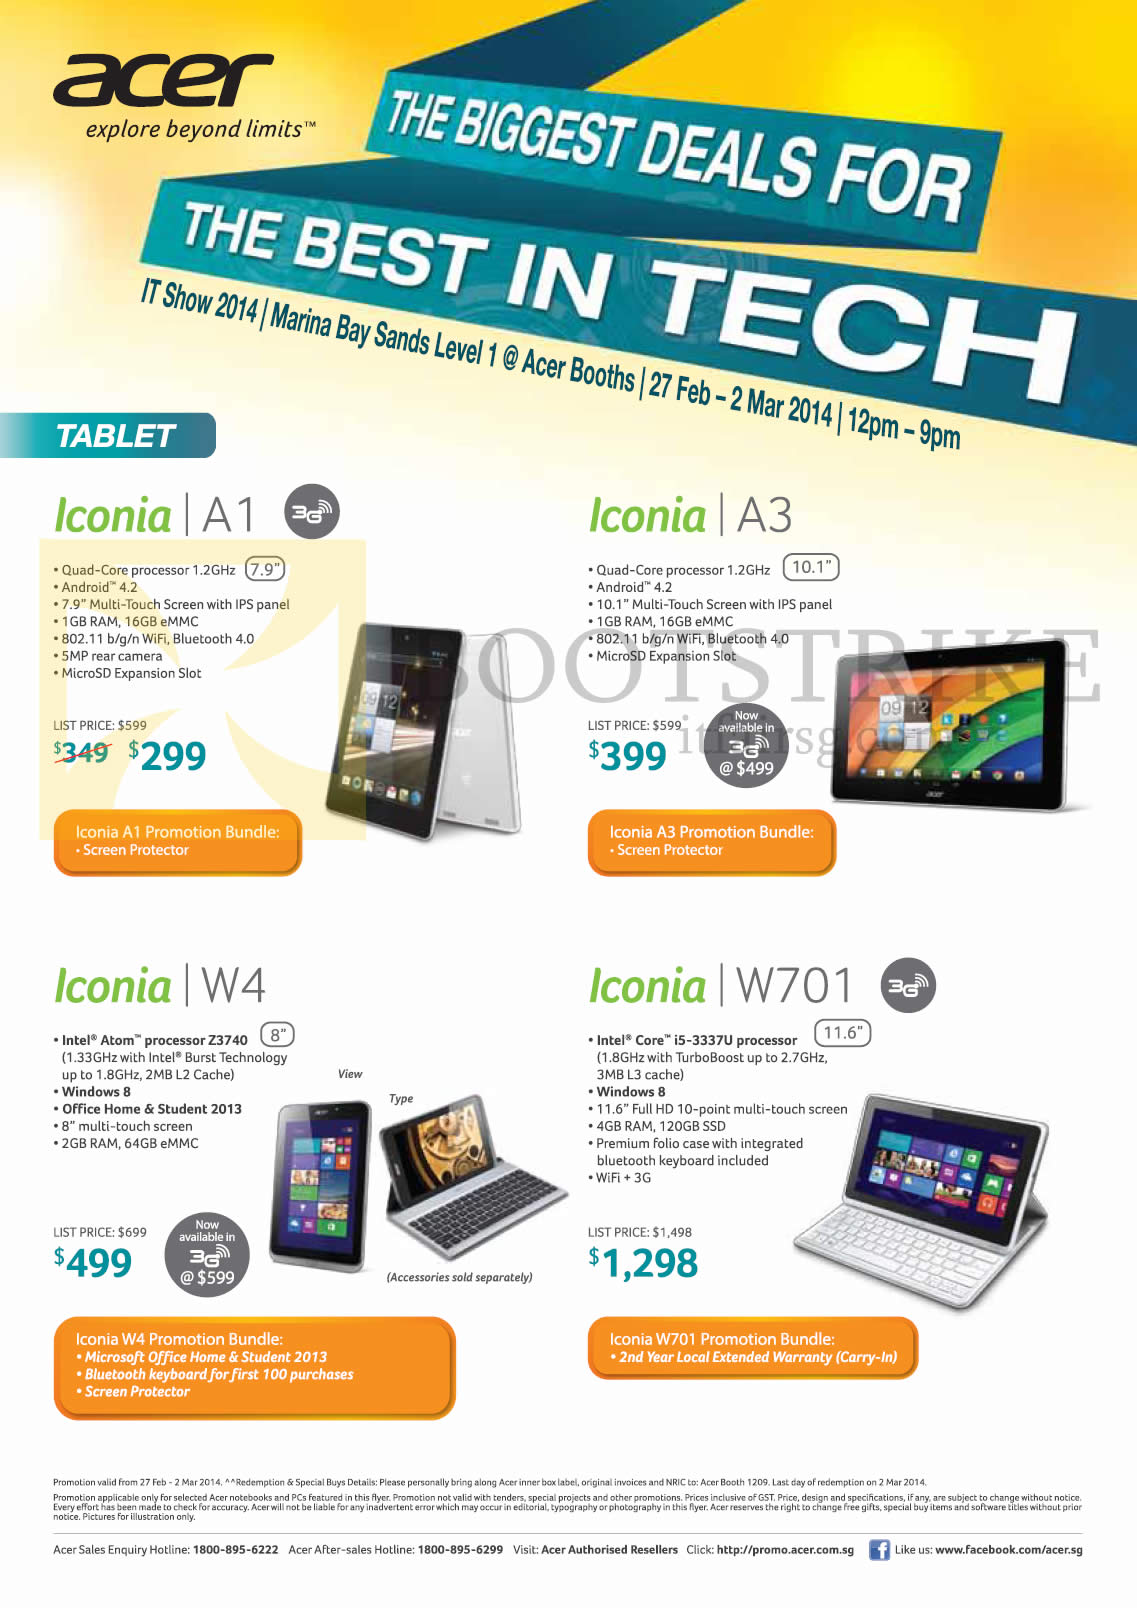 IT SHOW 2014 price list image brochure of Acer Tablets Iconia A1, A3, W4, W701